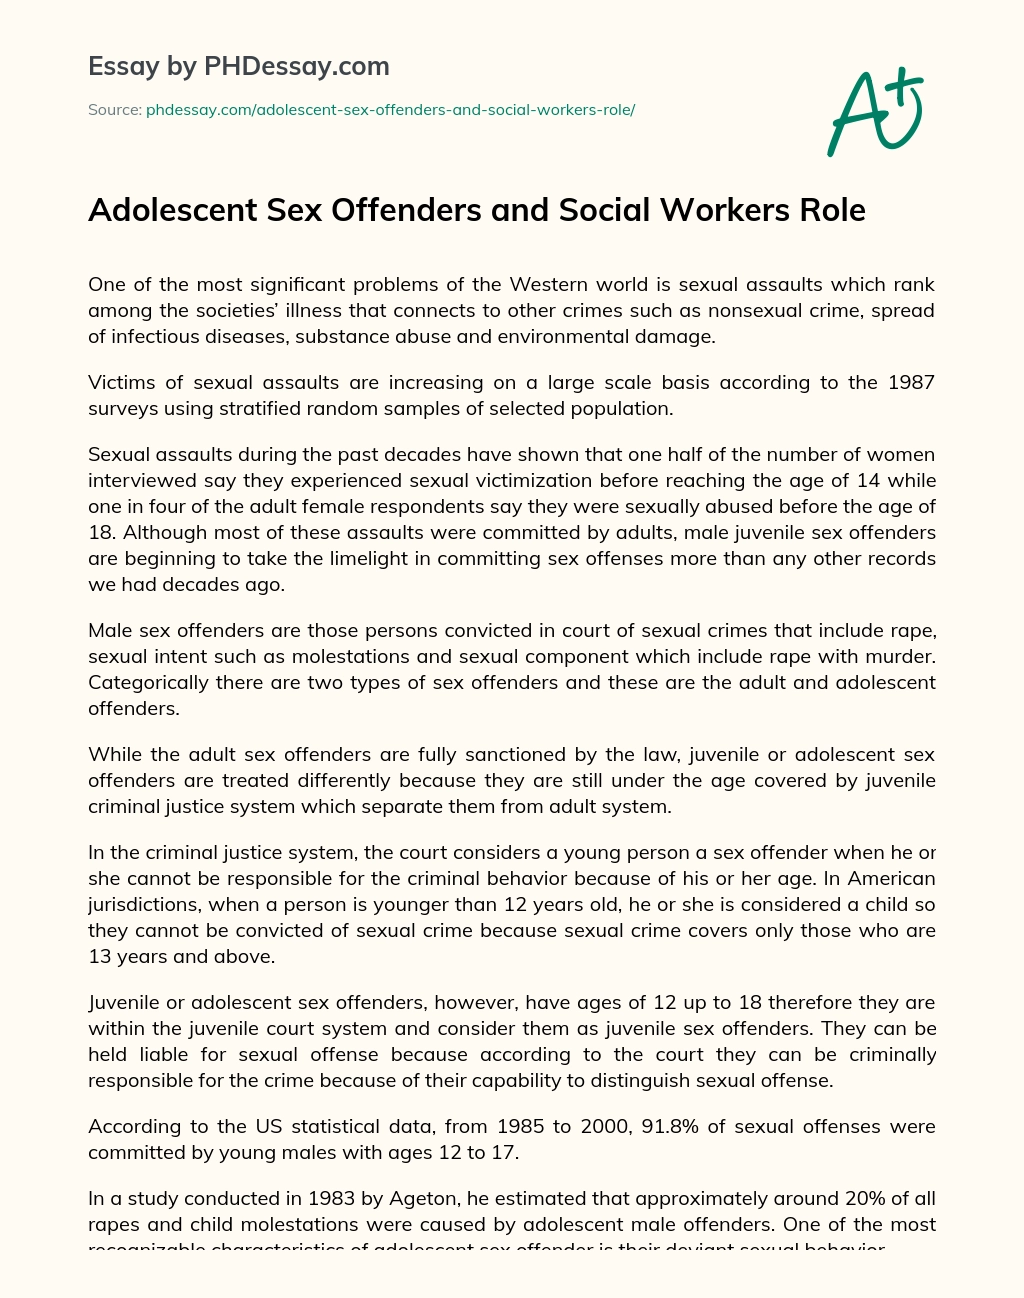 Adolescent Sex Offenders and Social Workers Role essay